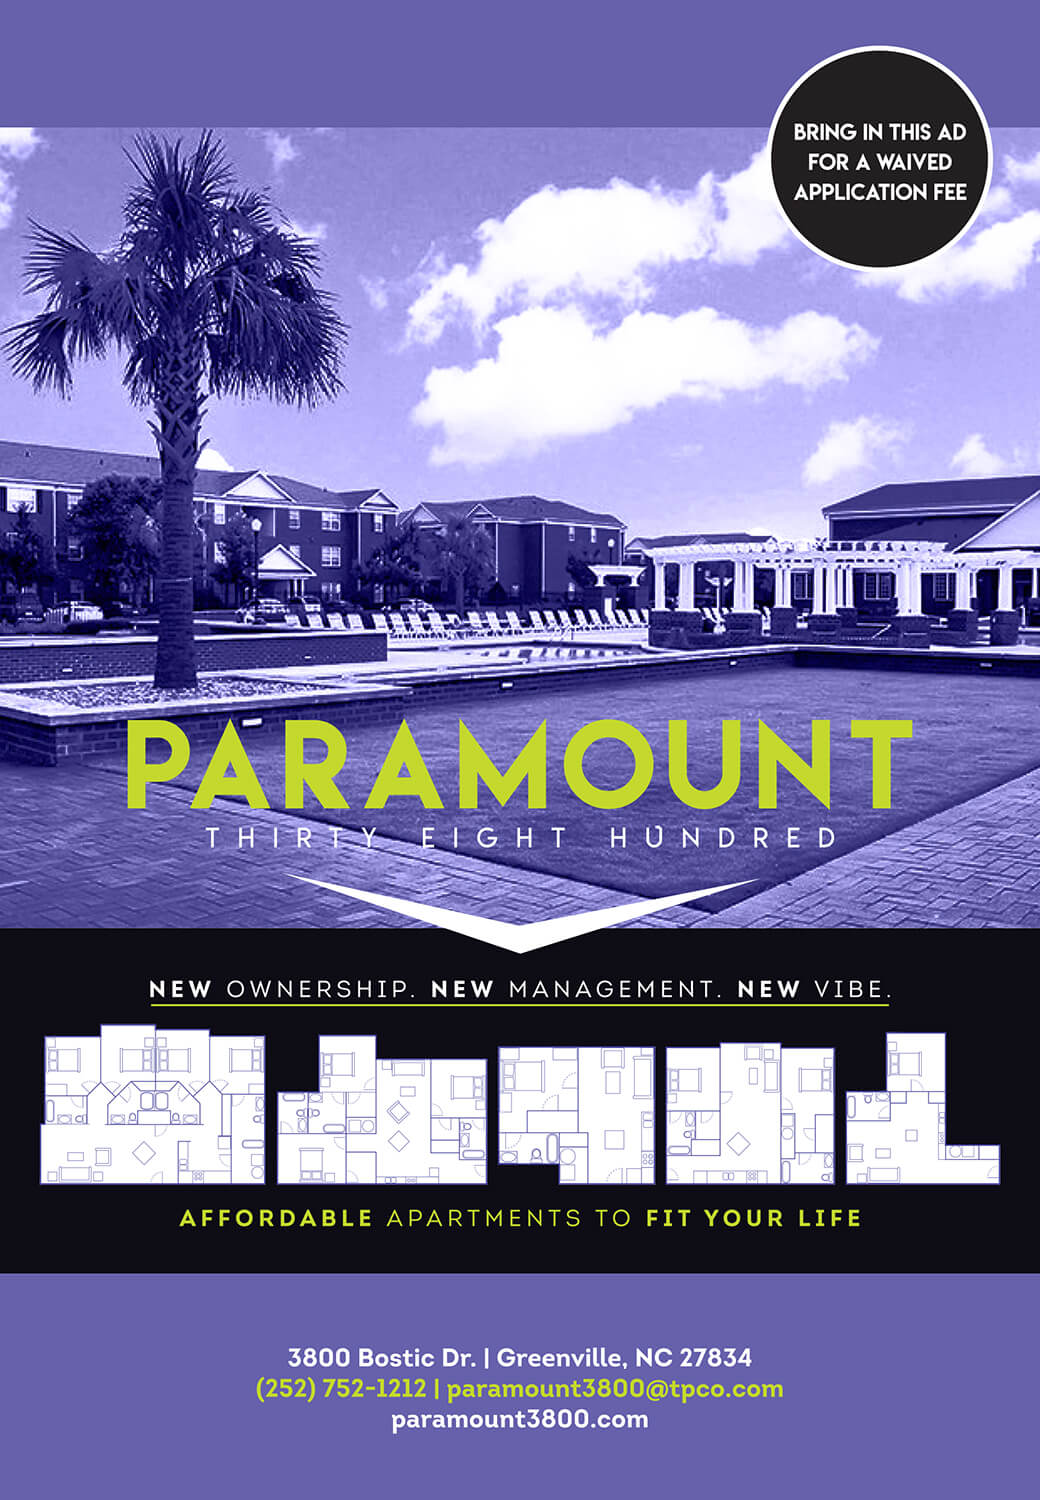 advertisement for Paramount Apartments